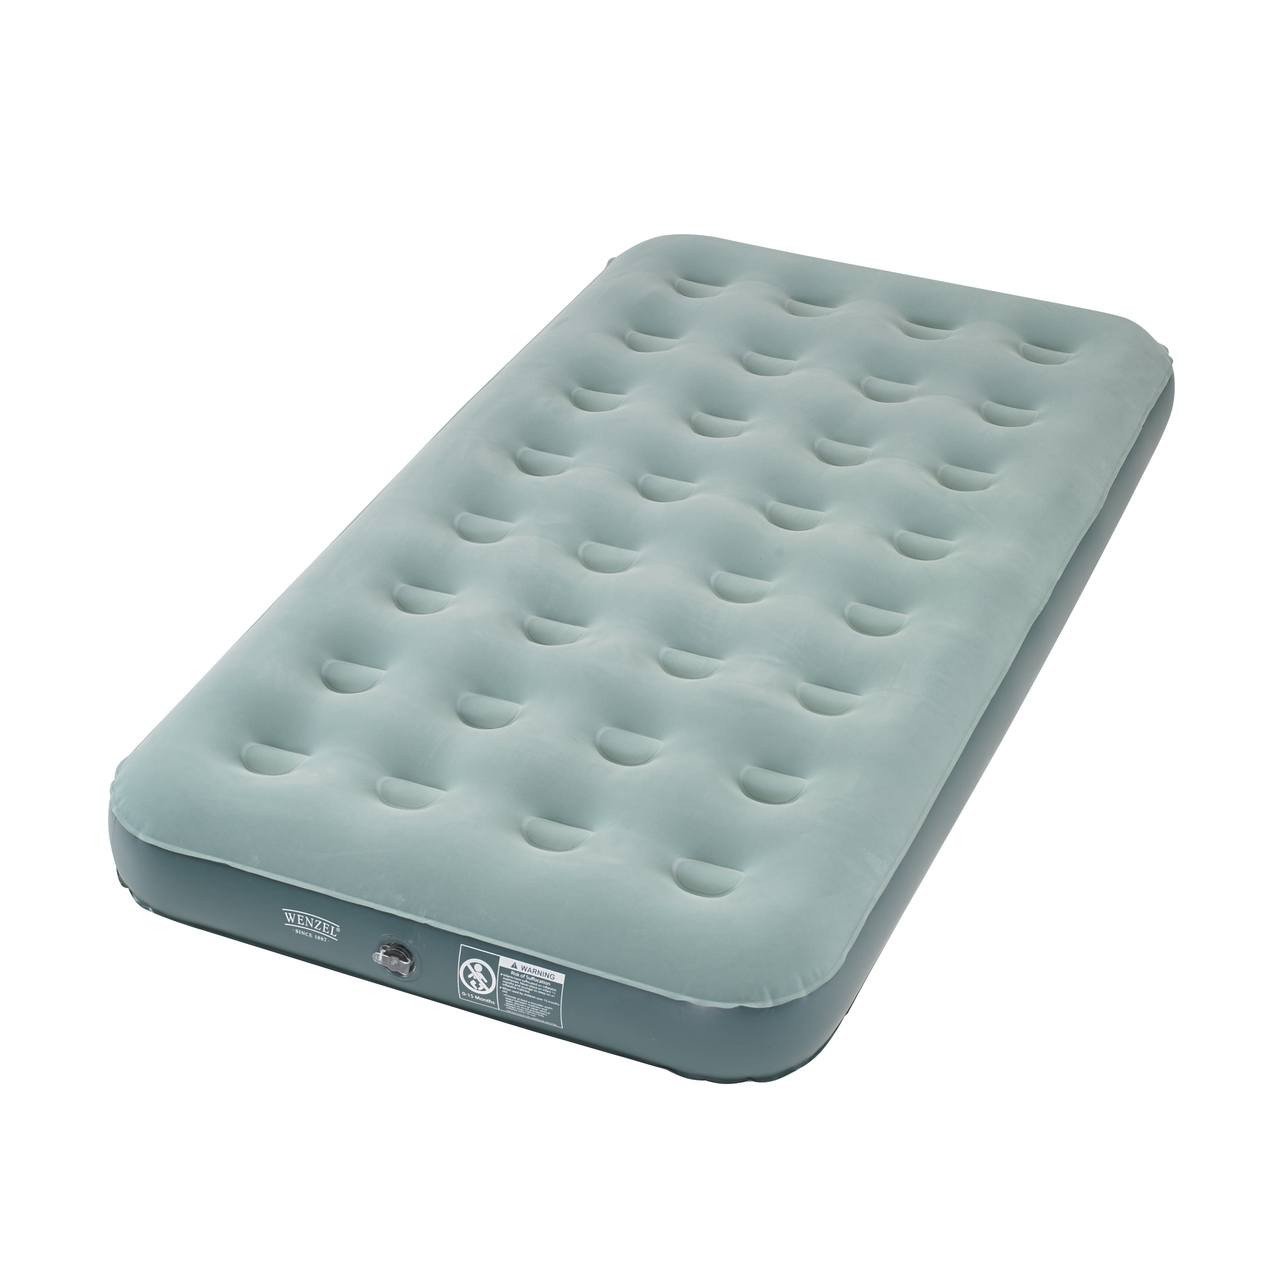 Wenzel Sleep-Away Airbed - Twin, light green and green, completely inflated laying flat